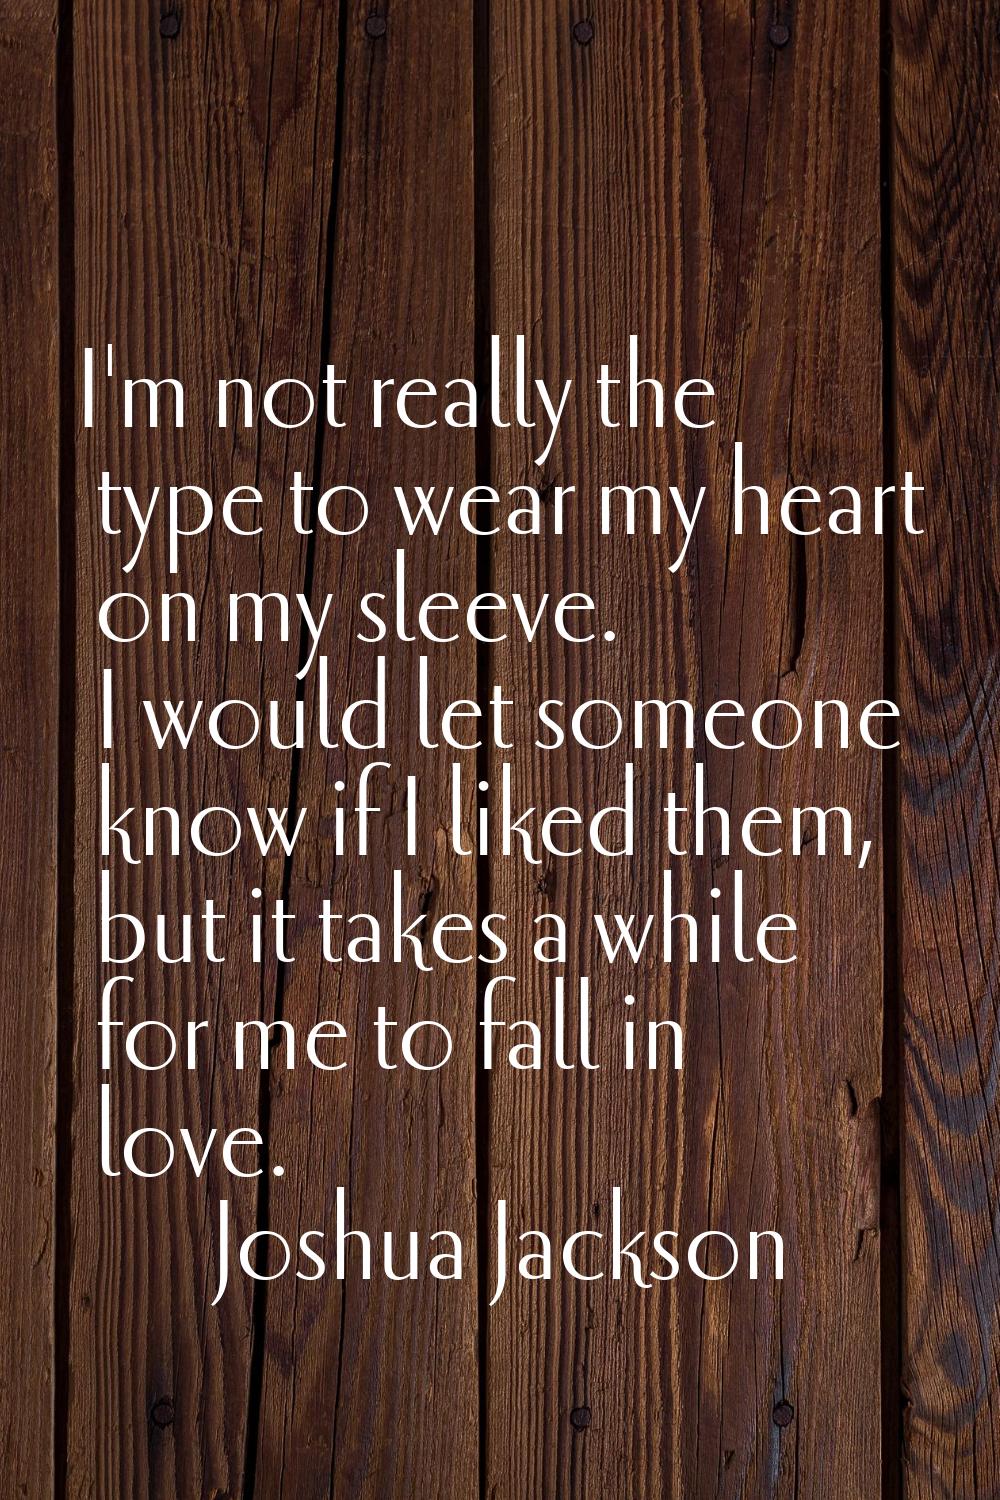 I'm not really the type to wear my heart on my sleeve. I would let someone know if I liked them, bu